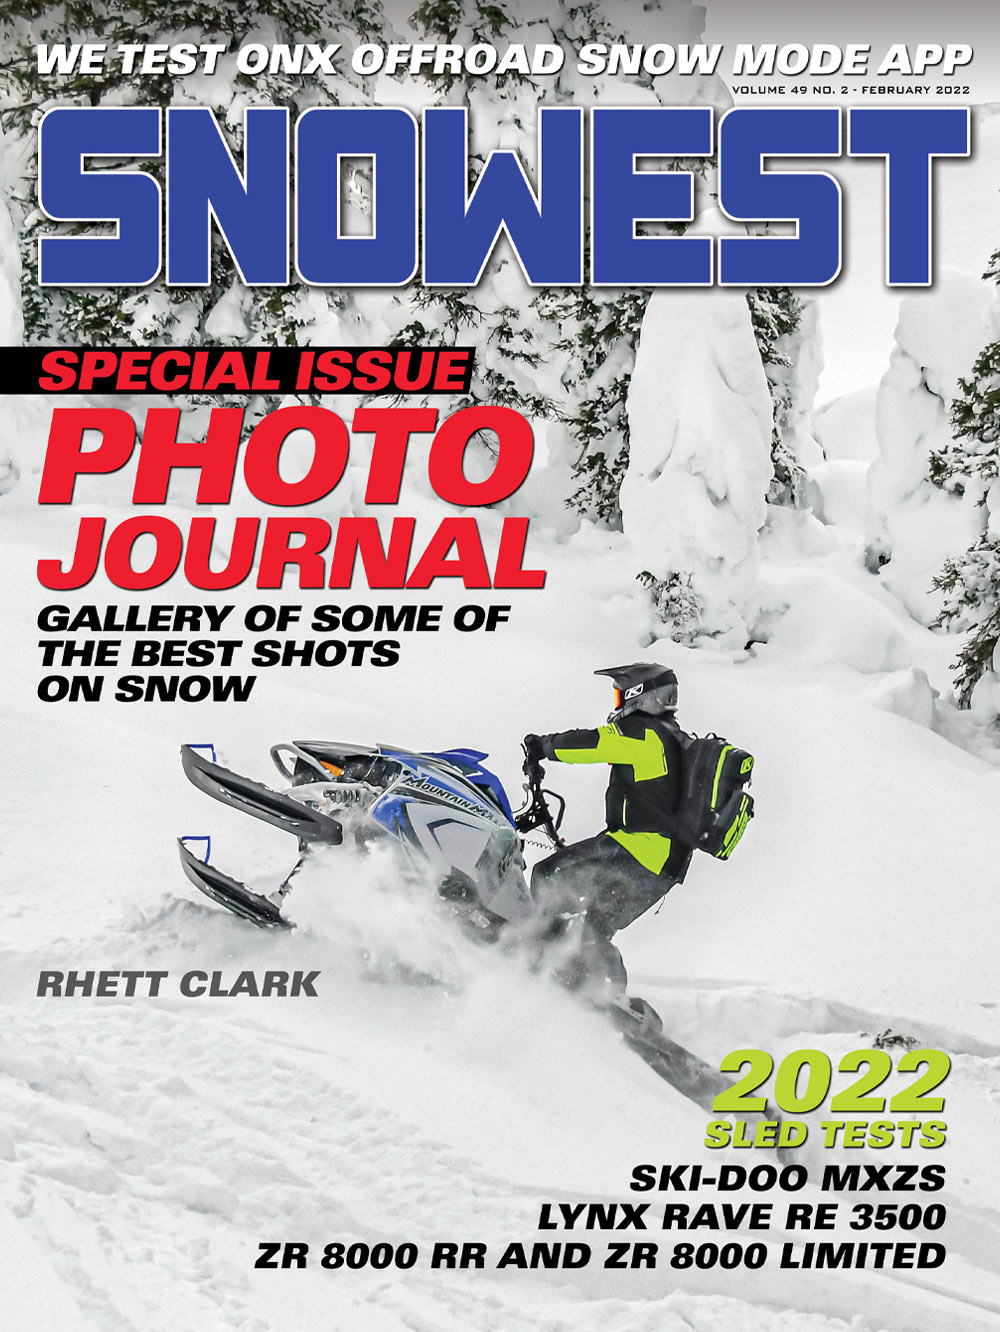 SnoWest February 2022 cover